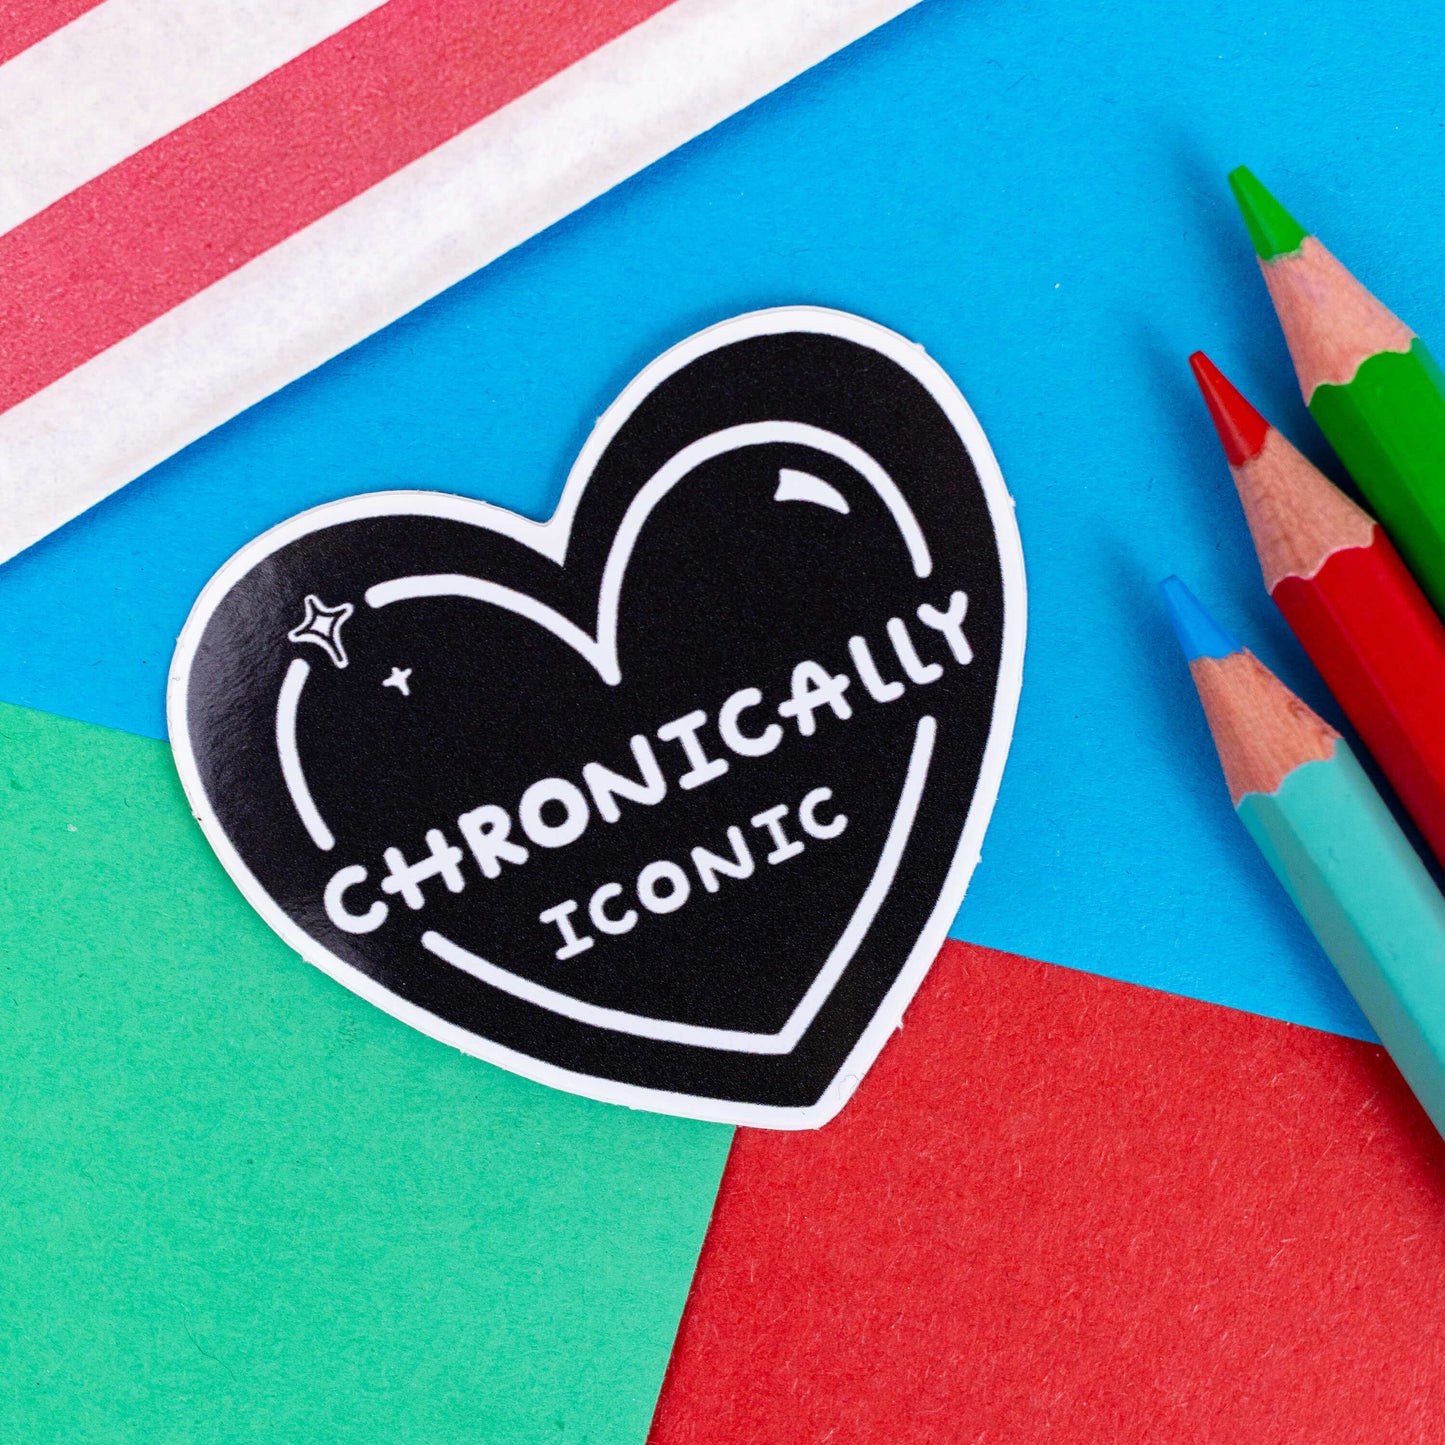 The Chronically Iconic Sticker on a red, blue and green background with colouring pencils and red stripe candy bag. The black heart shaped sticker has a white outline with sparkles and centre text reading 'chronically iconic'. The design is raising awareness for chronic illness and invisible illness.